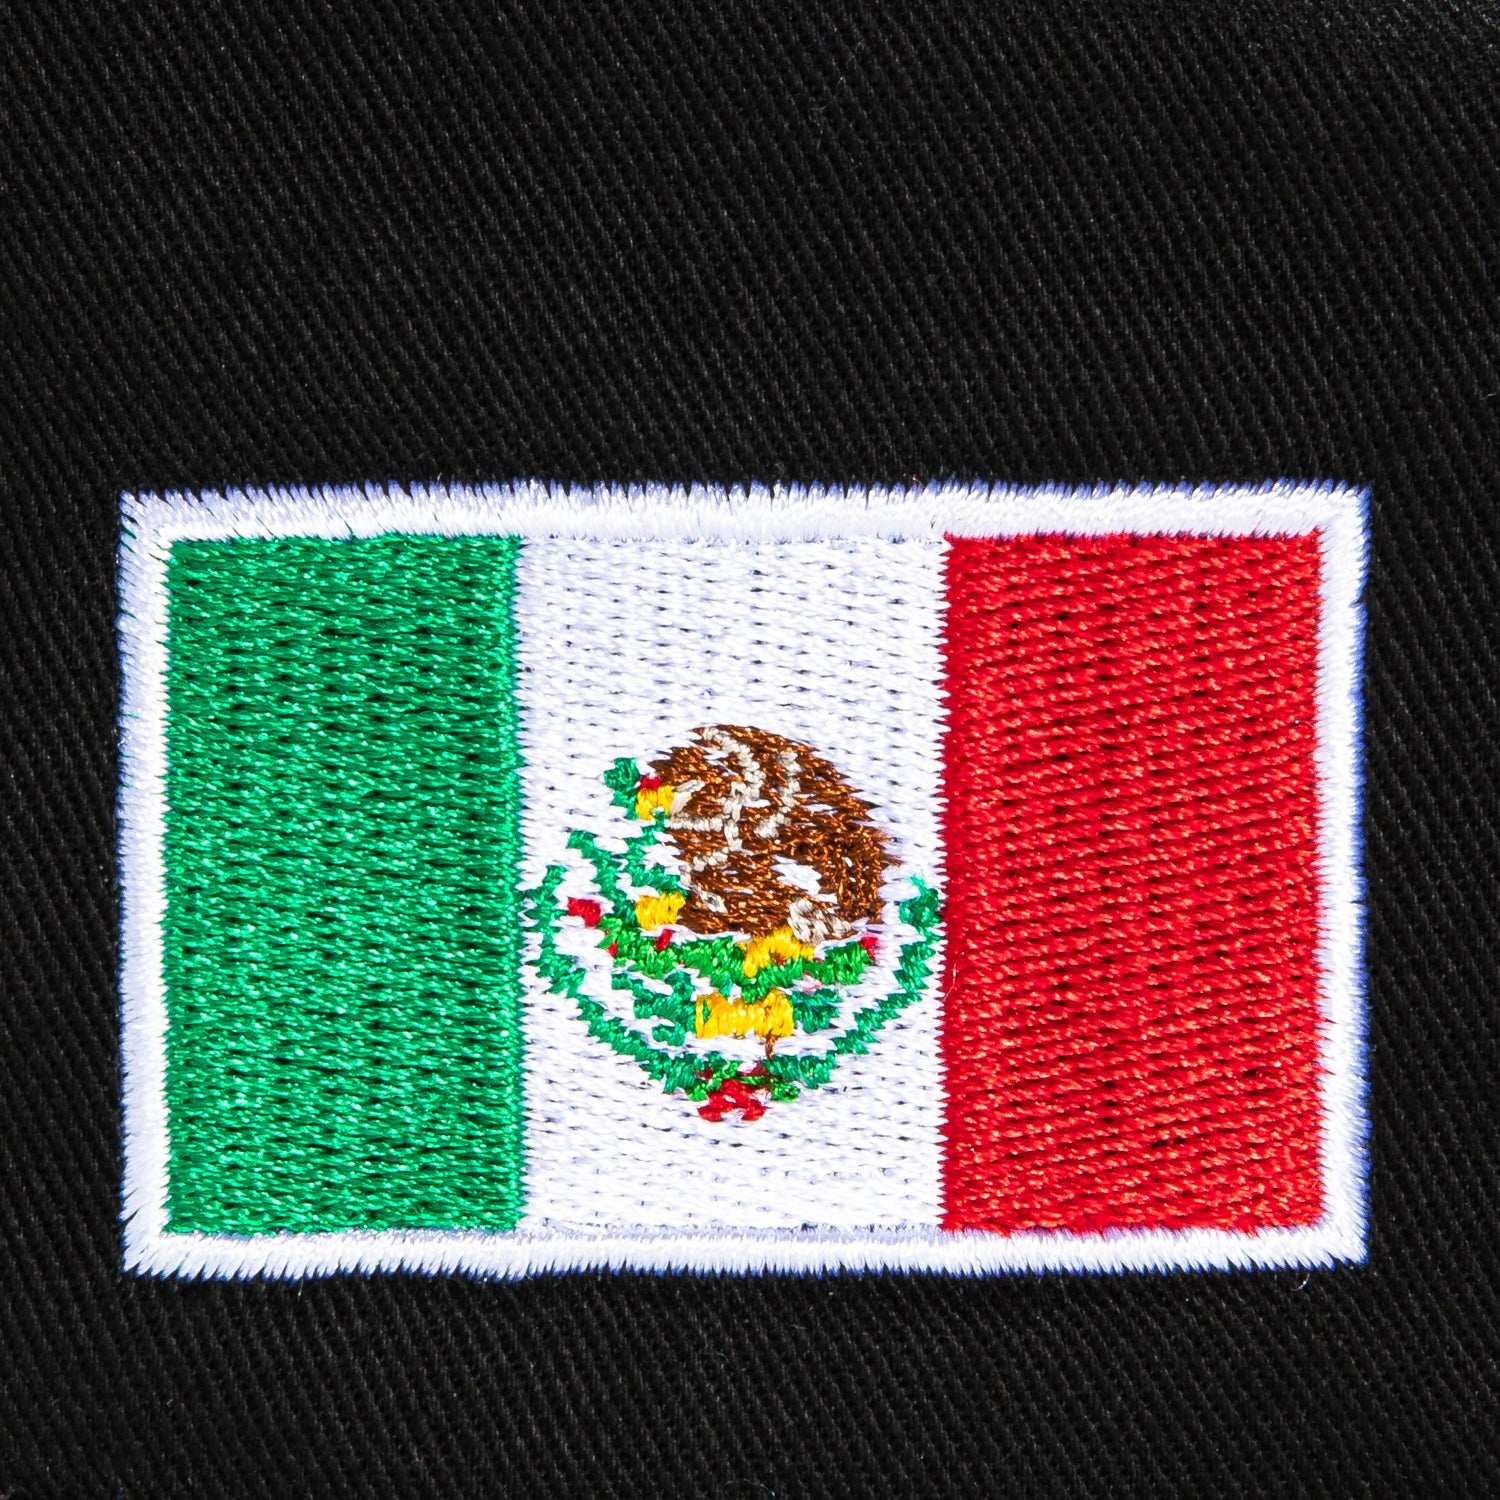 New Era 9Forty A-Frame Los Angeles Dodgers Mexico Flag Patch